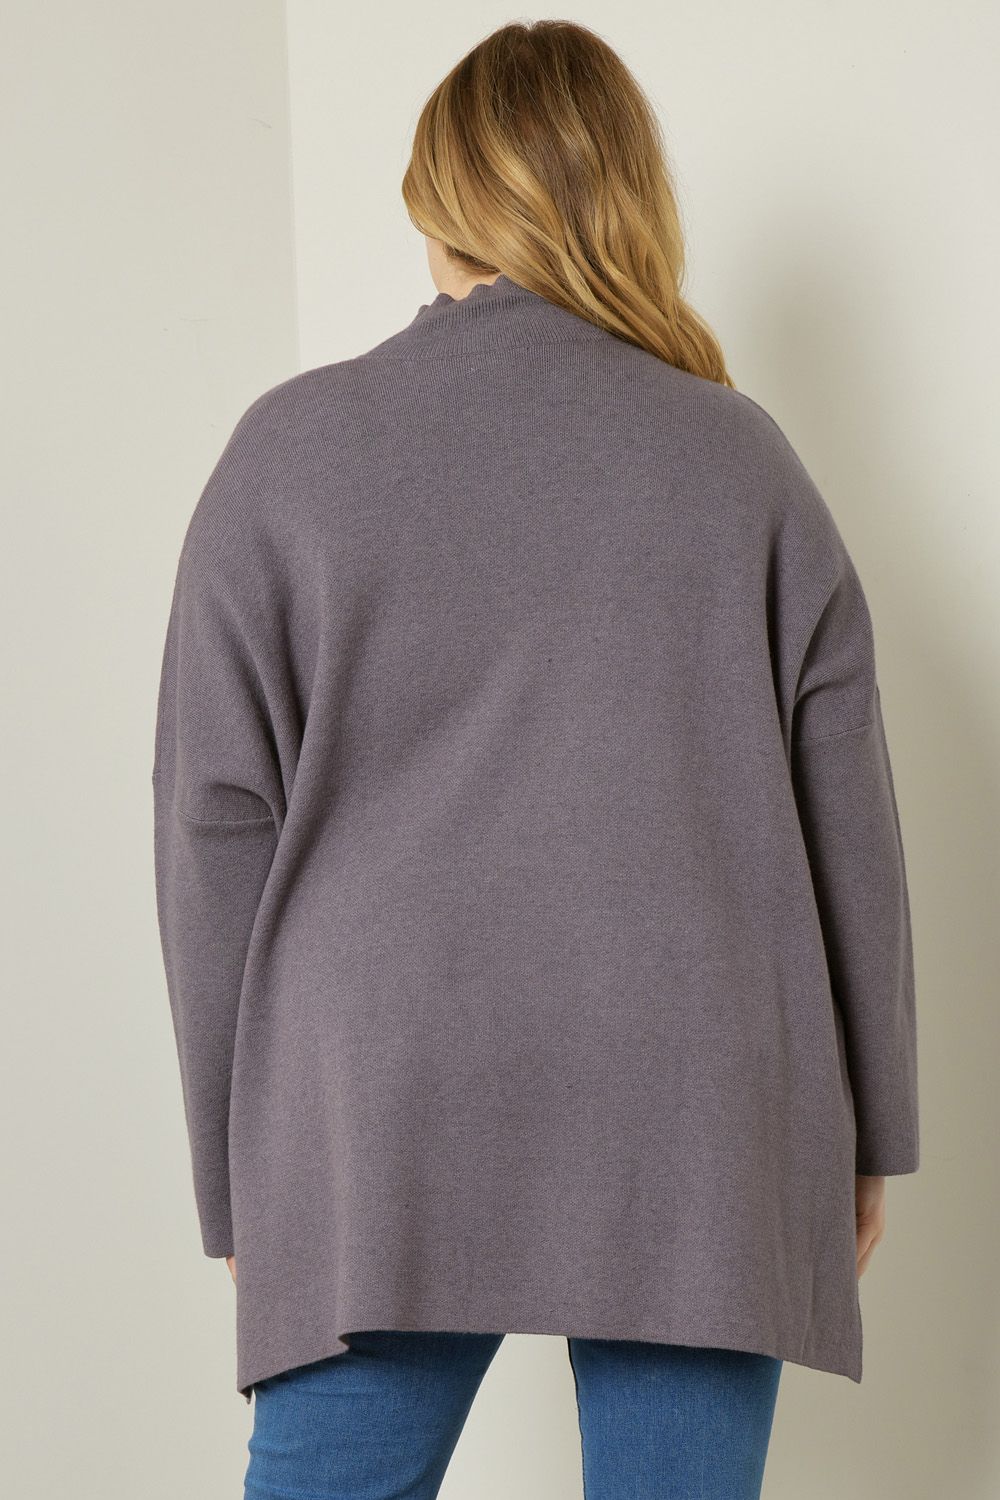 Slowing Down Sweater in 2 colors - Curvy Sizes